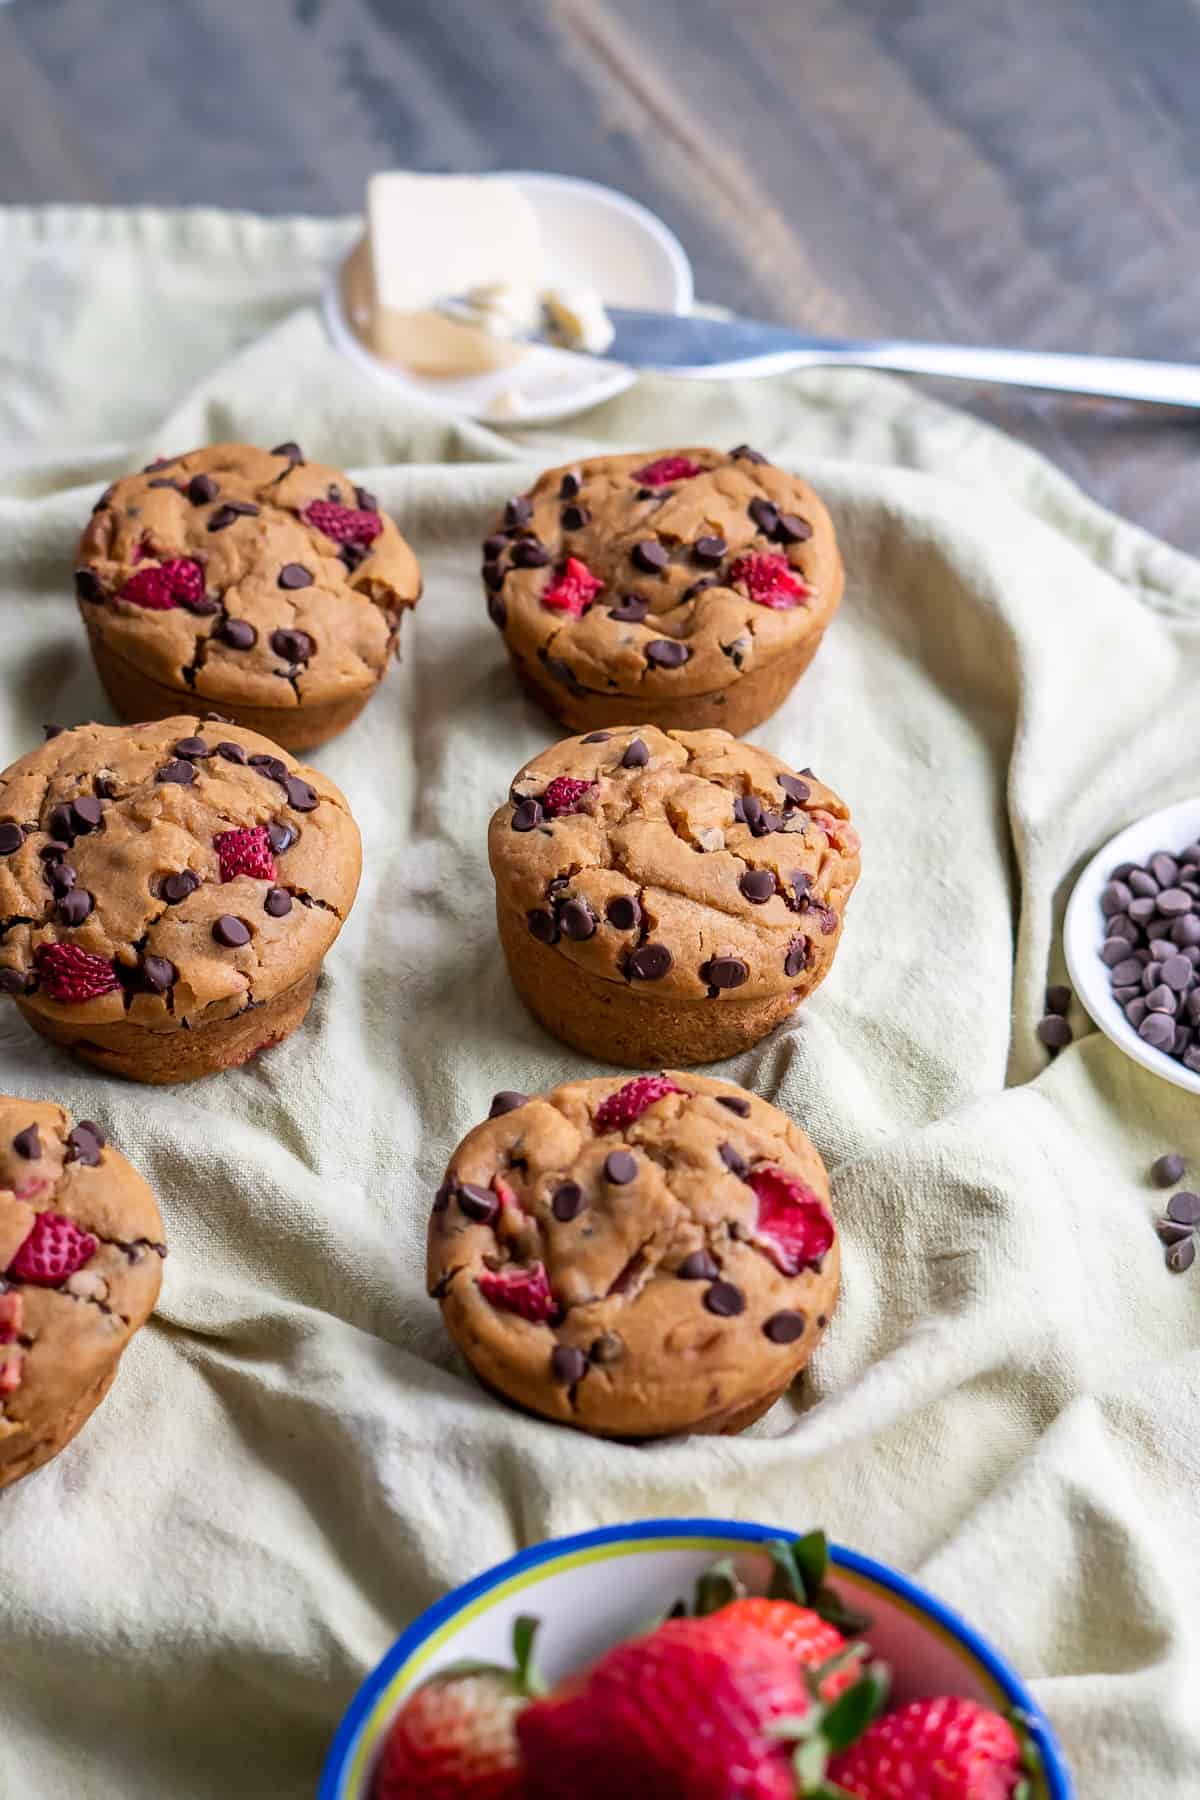 Six small batch gluten free strawberry muffins with chocolate chips sitting on a cloth napkin with butter and chocolate chips on the side.